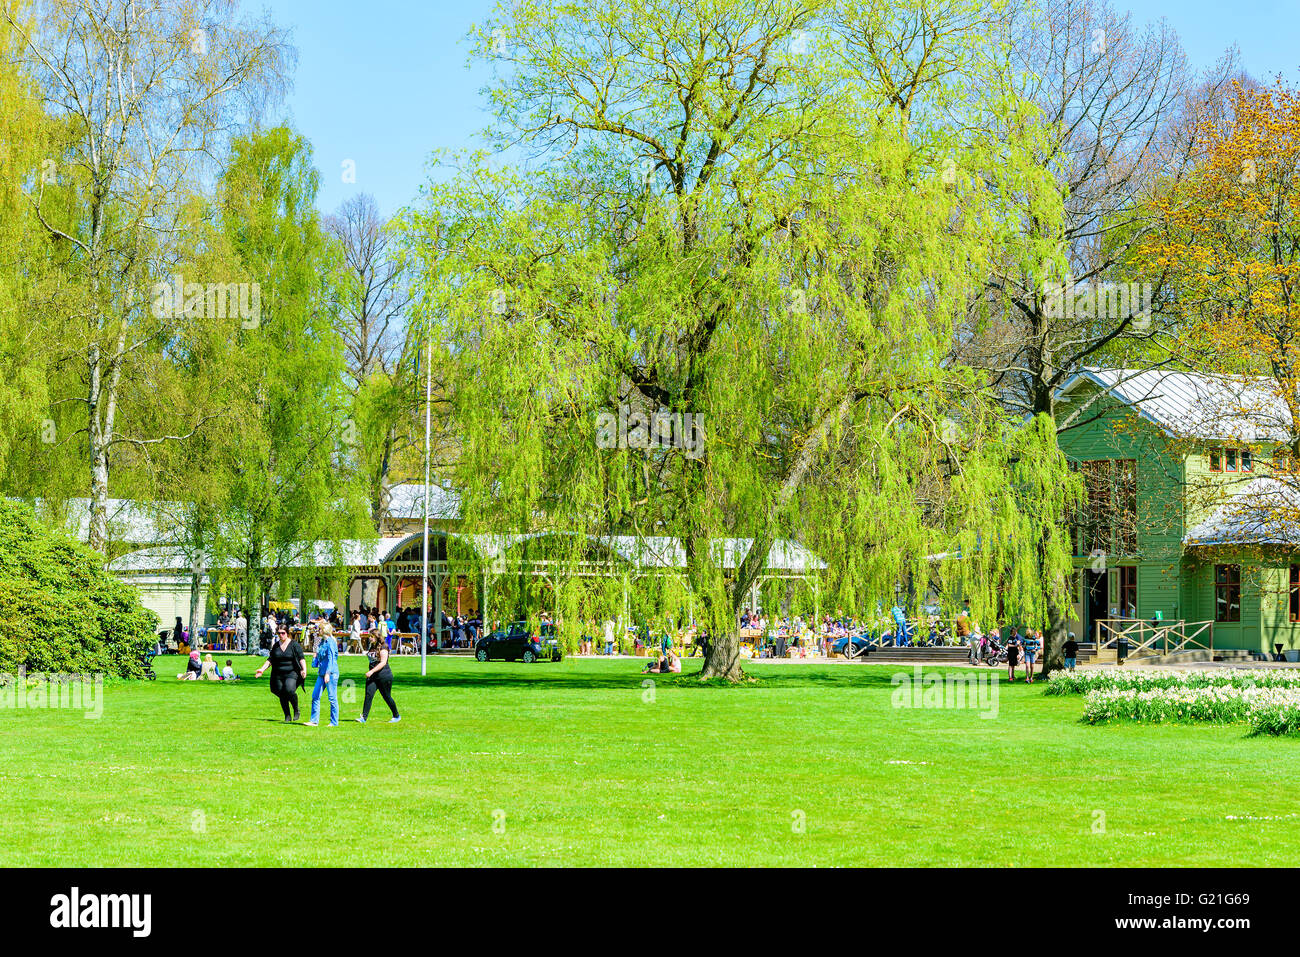 Ronneby, Sweden - May 8, 2016: People enjoying the fine weather while relaxing in the park. Ongoing flea market in the open buil Stock Photo